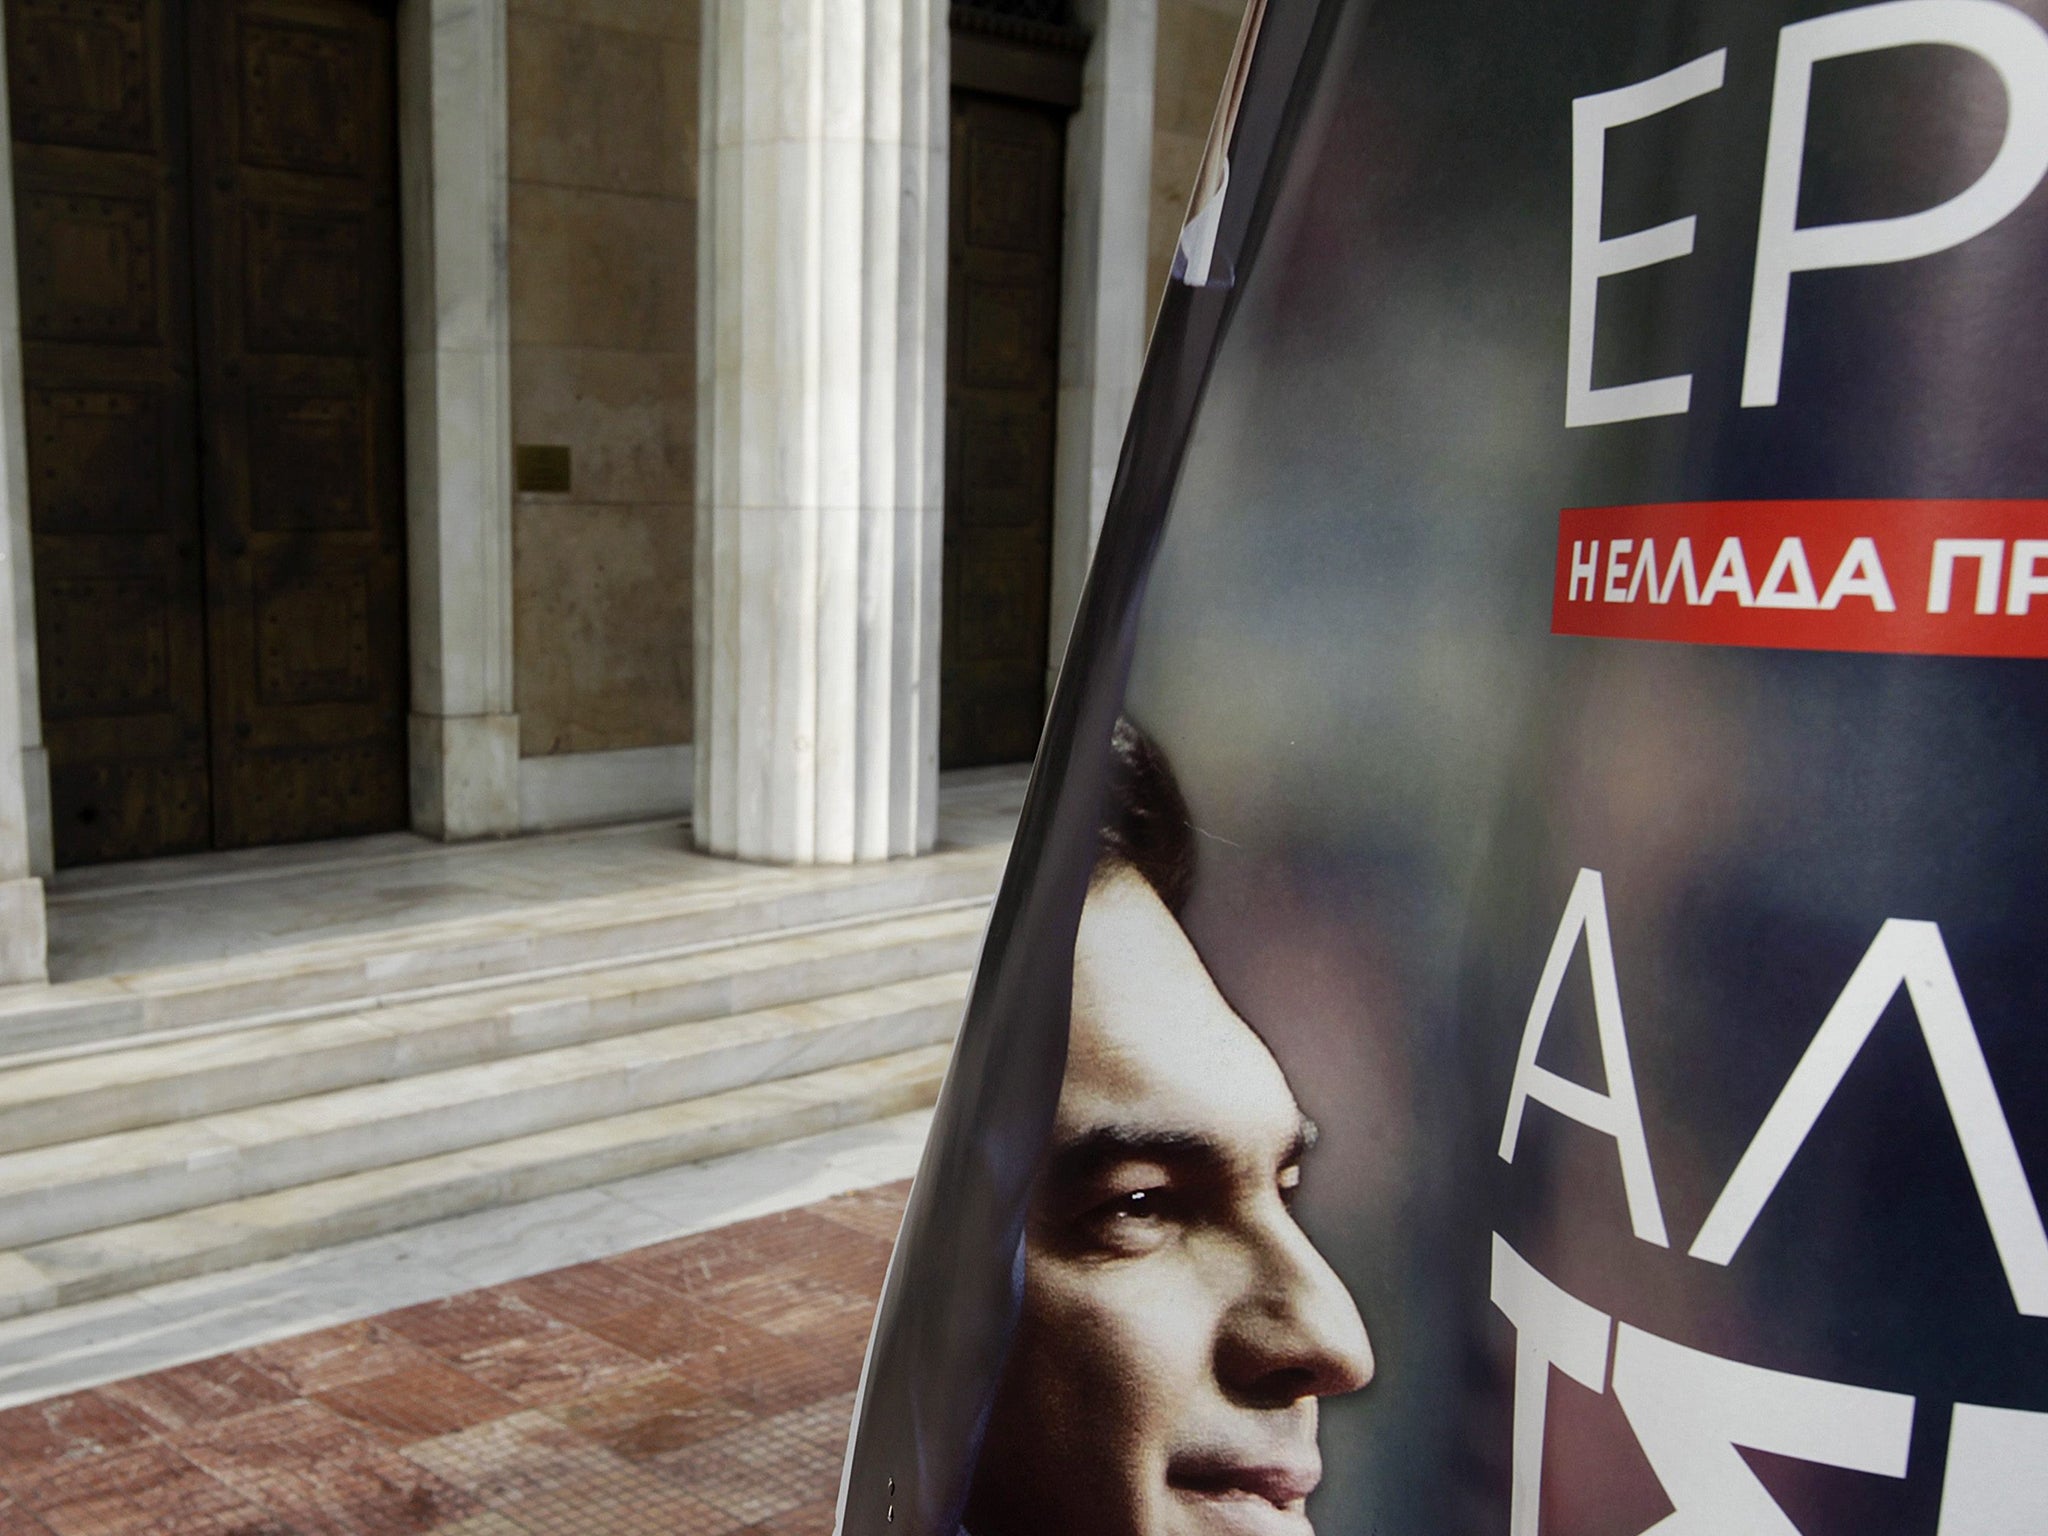 A pre-election poster of Syriza's leader Alexis Tsipras